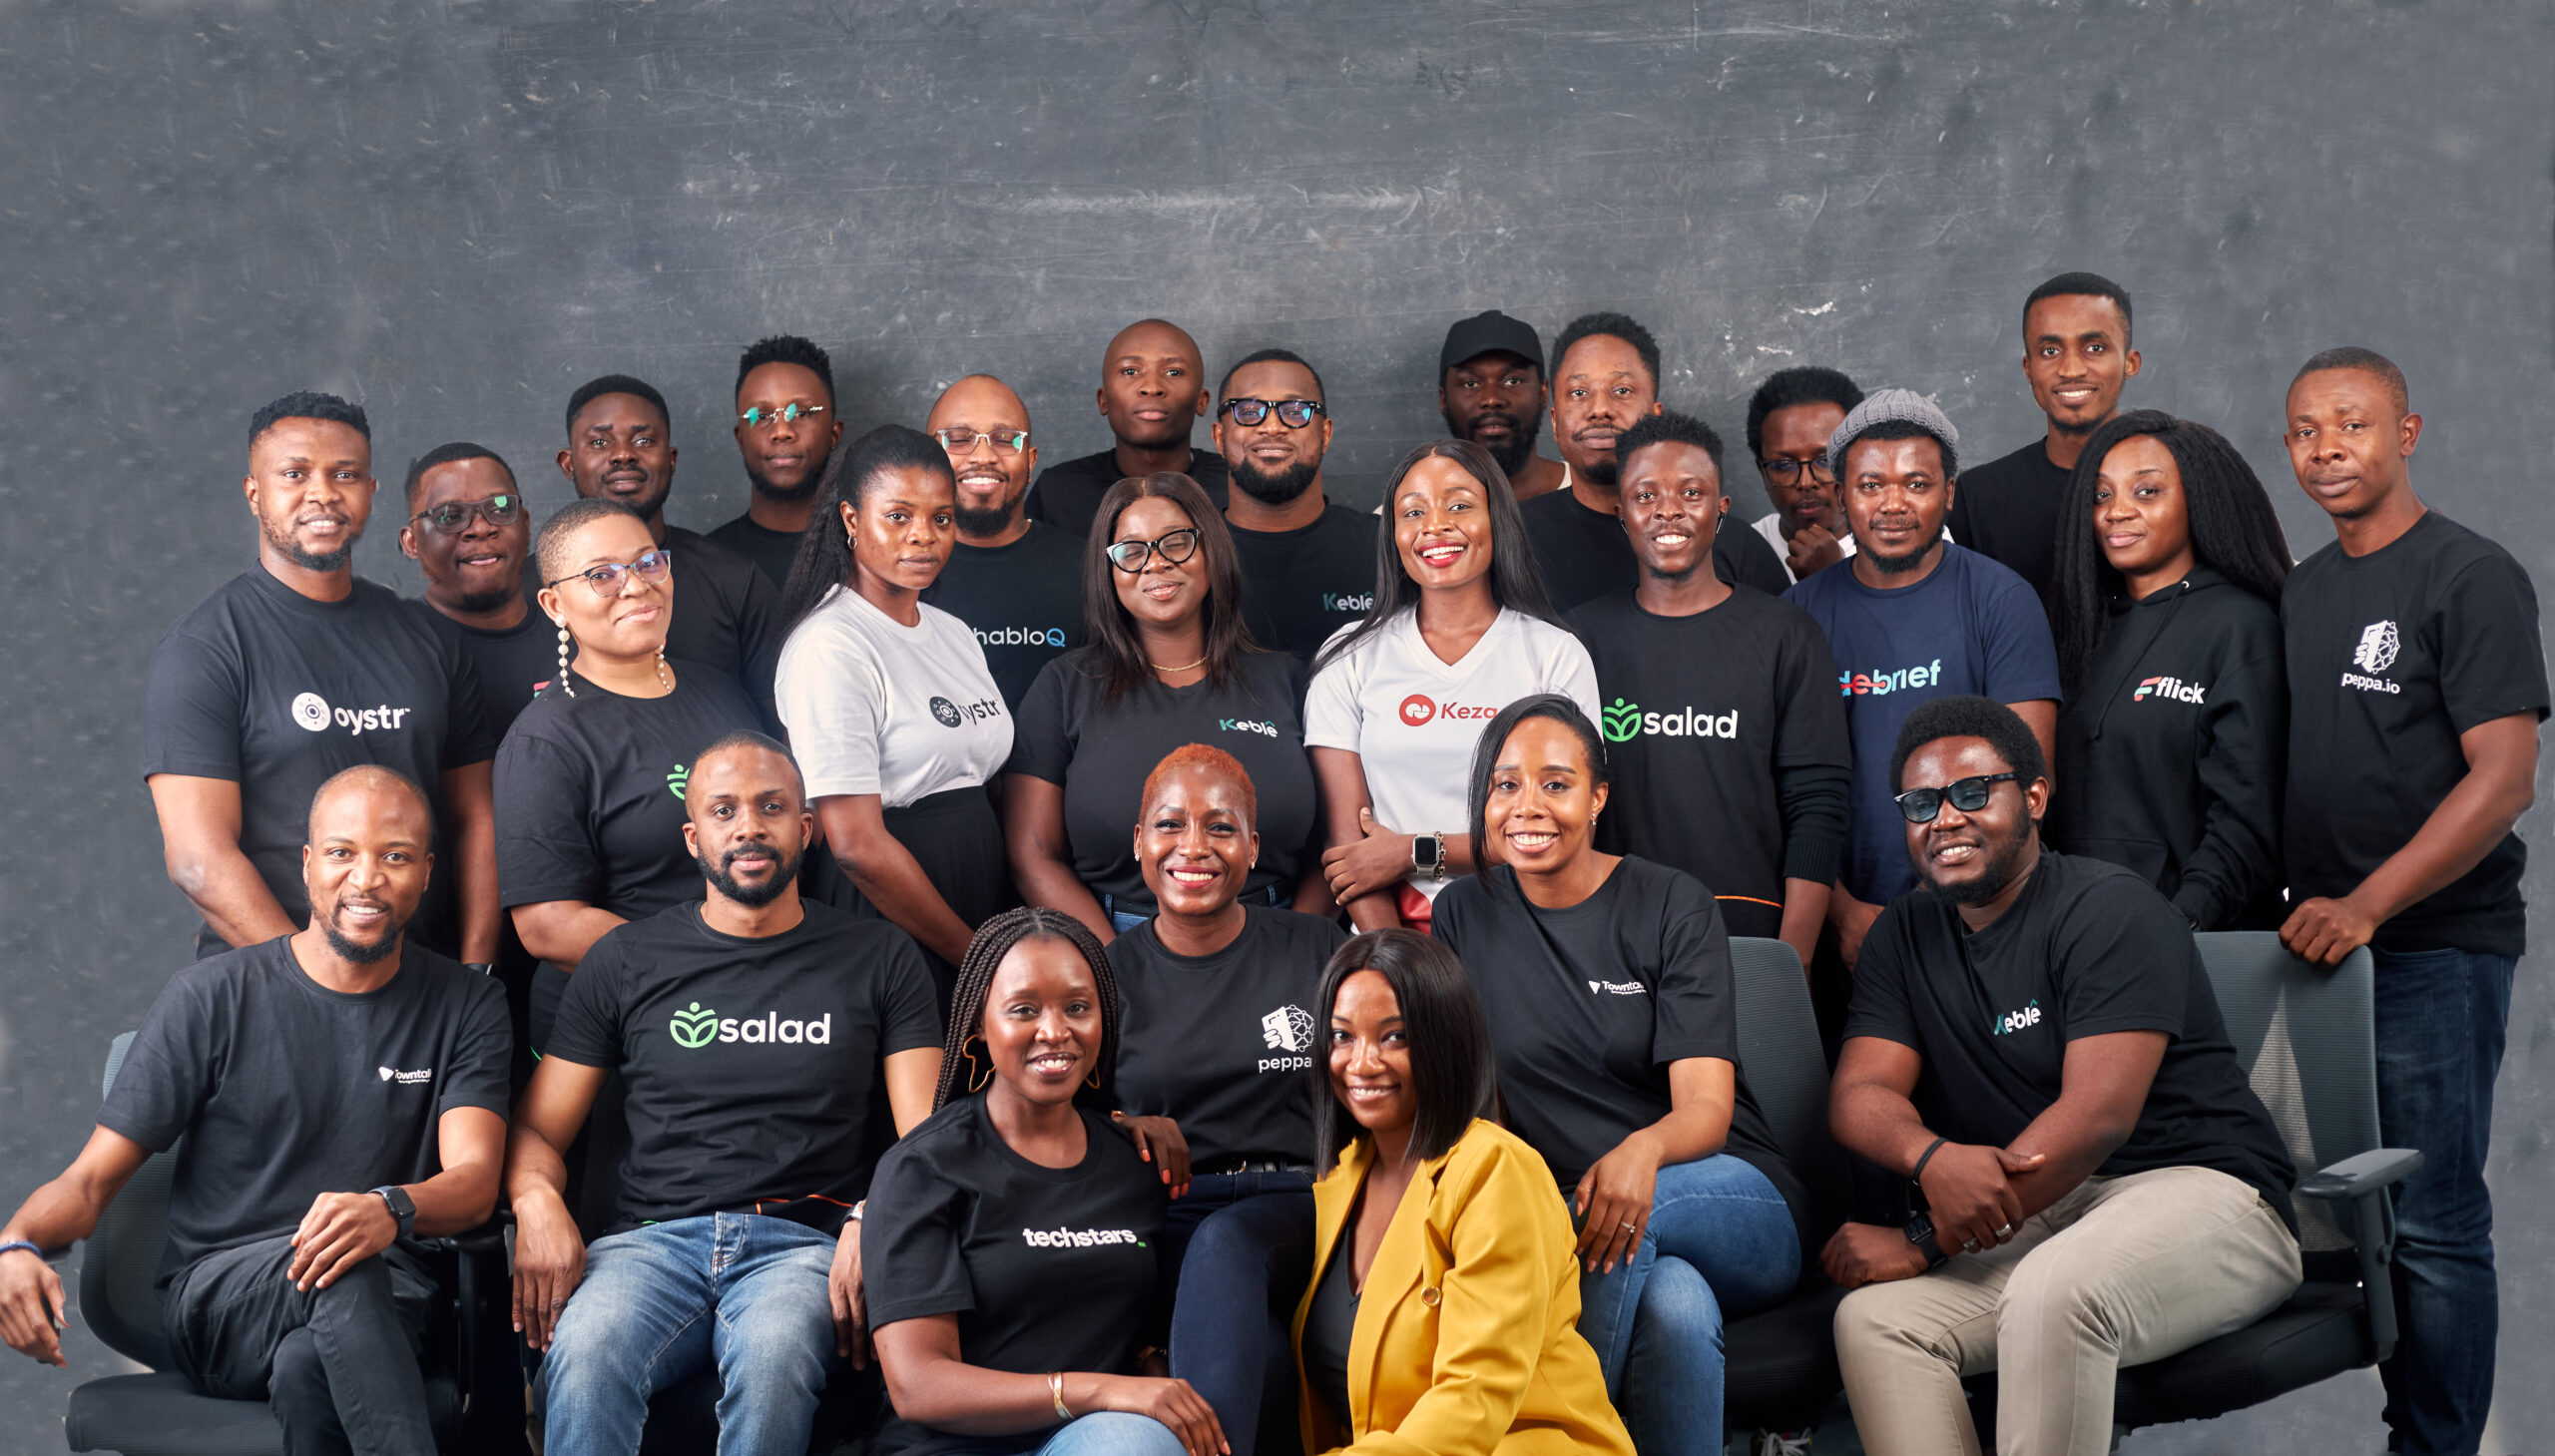 Meet the Cohorts for the Inaugural ARM Labs Techstars Accelerator Program